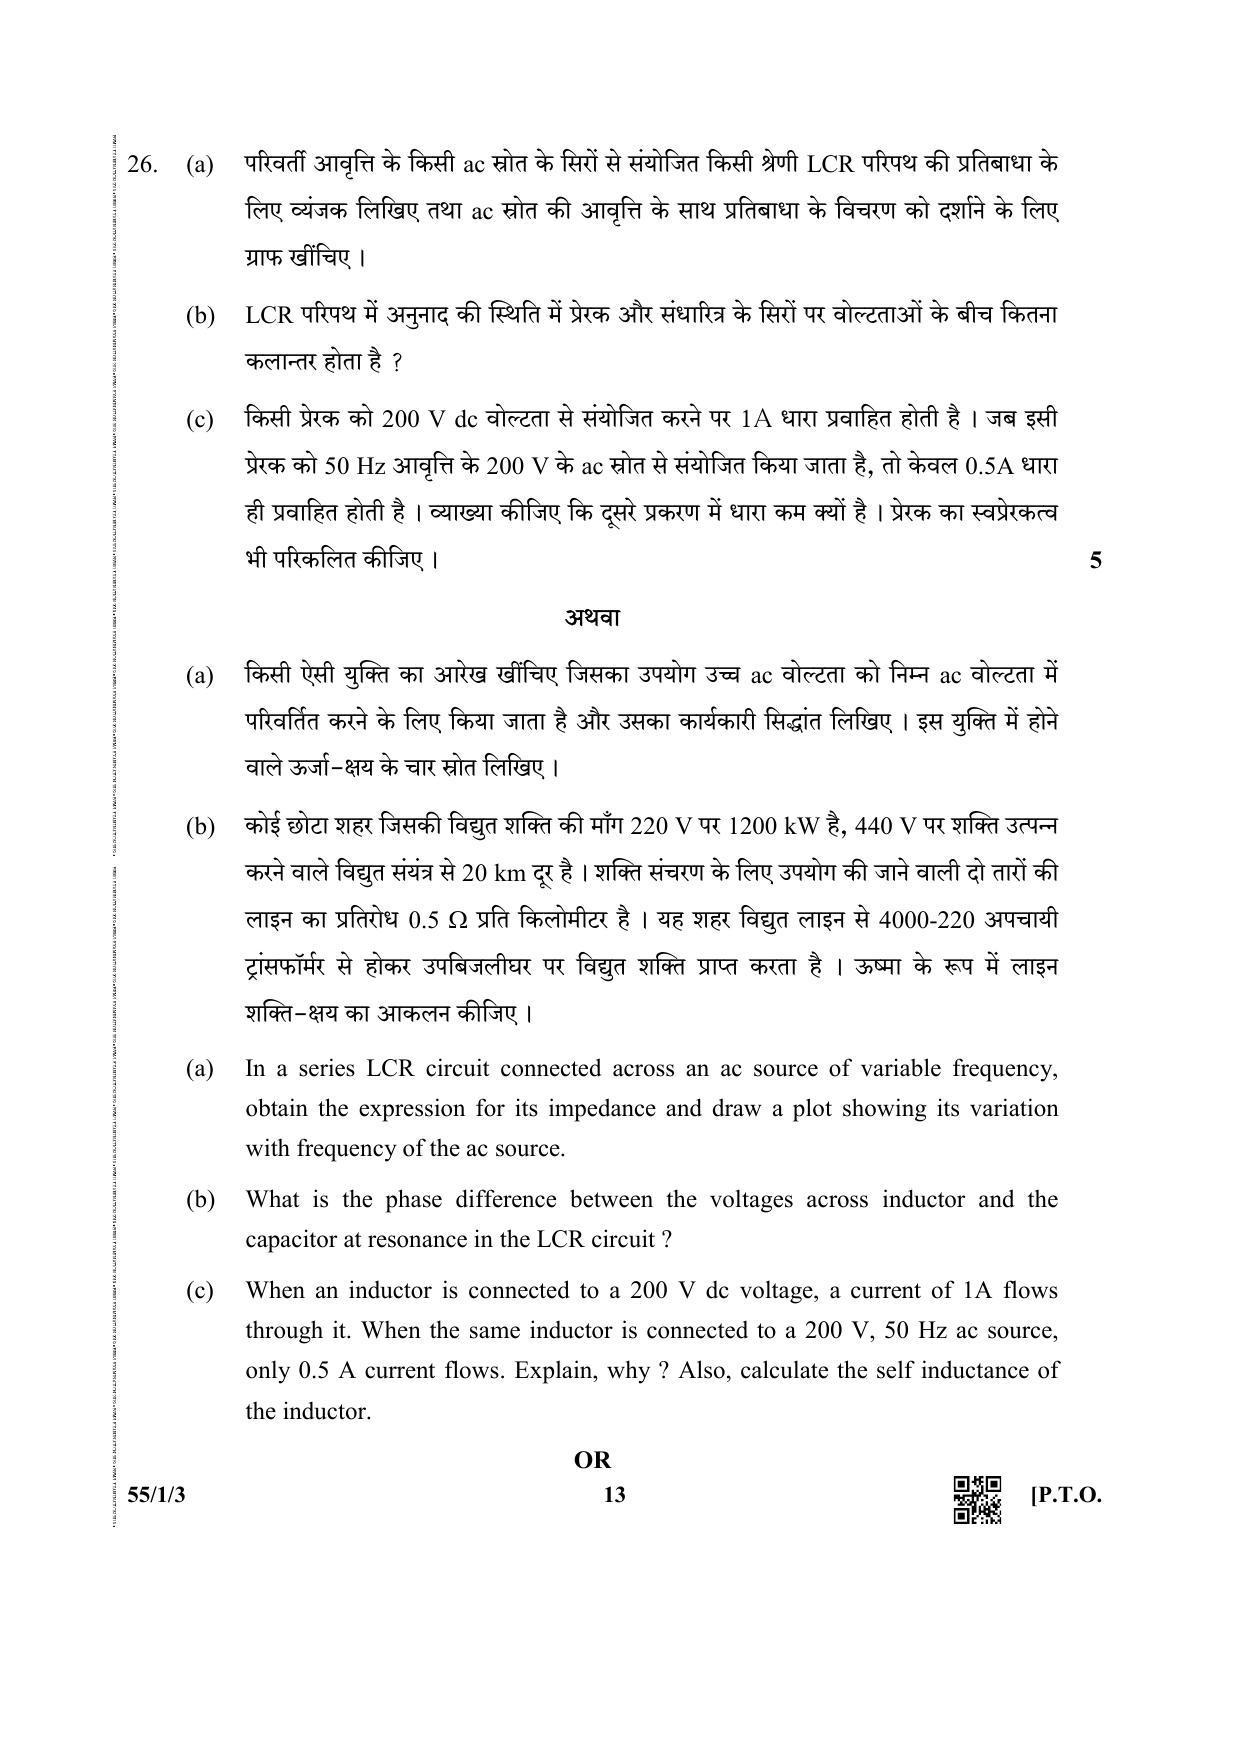 CBSE Class 12 55-1-3 (Physics) 2019 Question Paper - Page 13